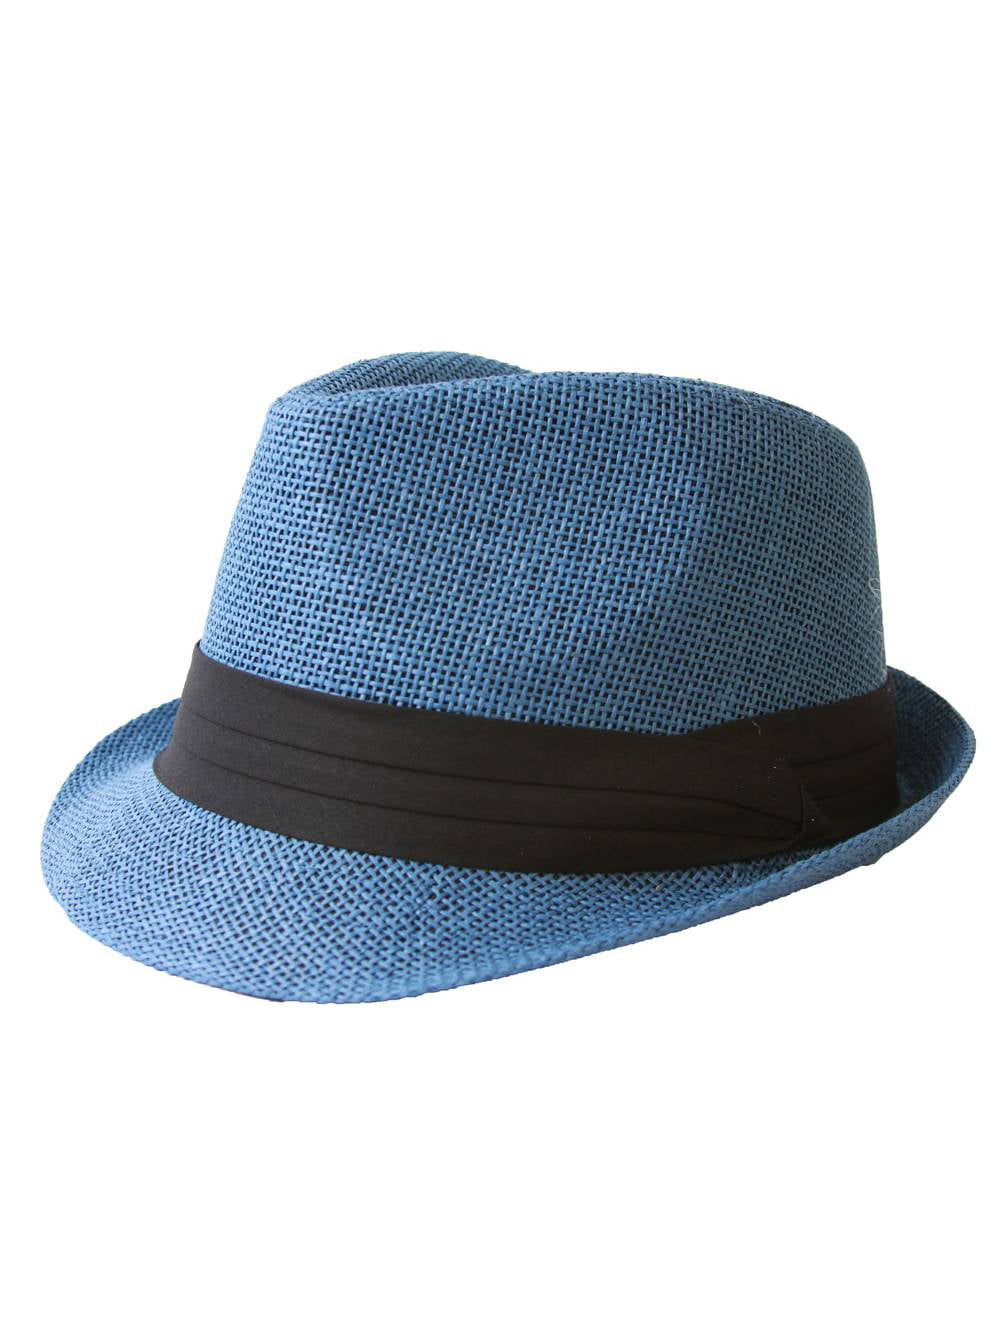 Hatter The Co Tweed Classic Cuban Style Fedora Fashion Cap Hat 